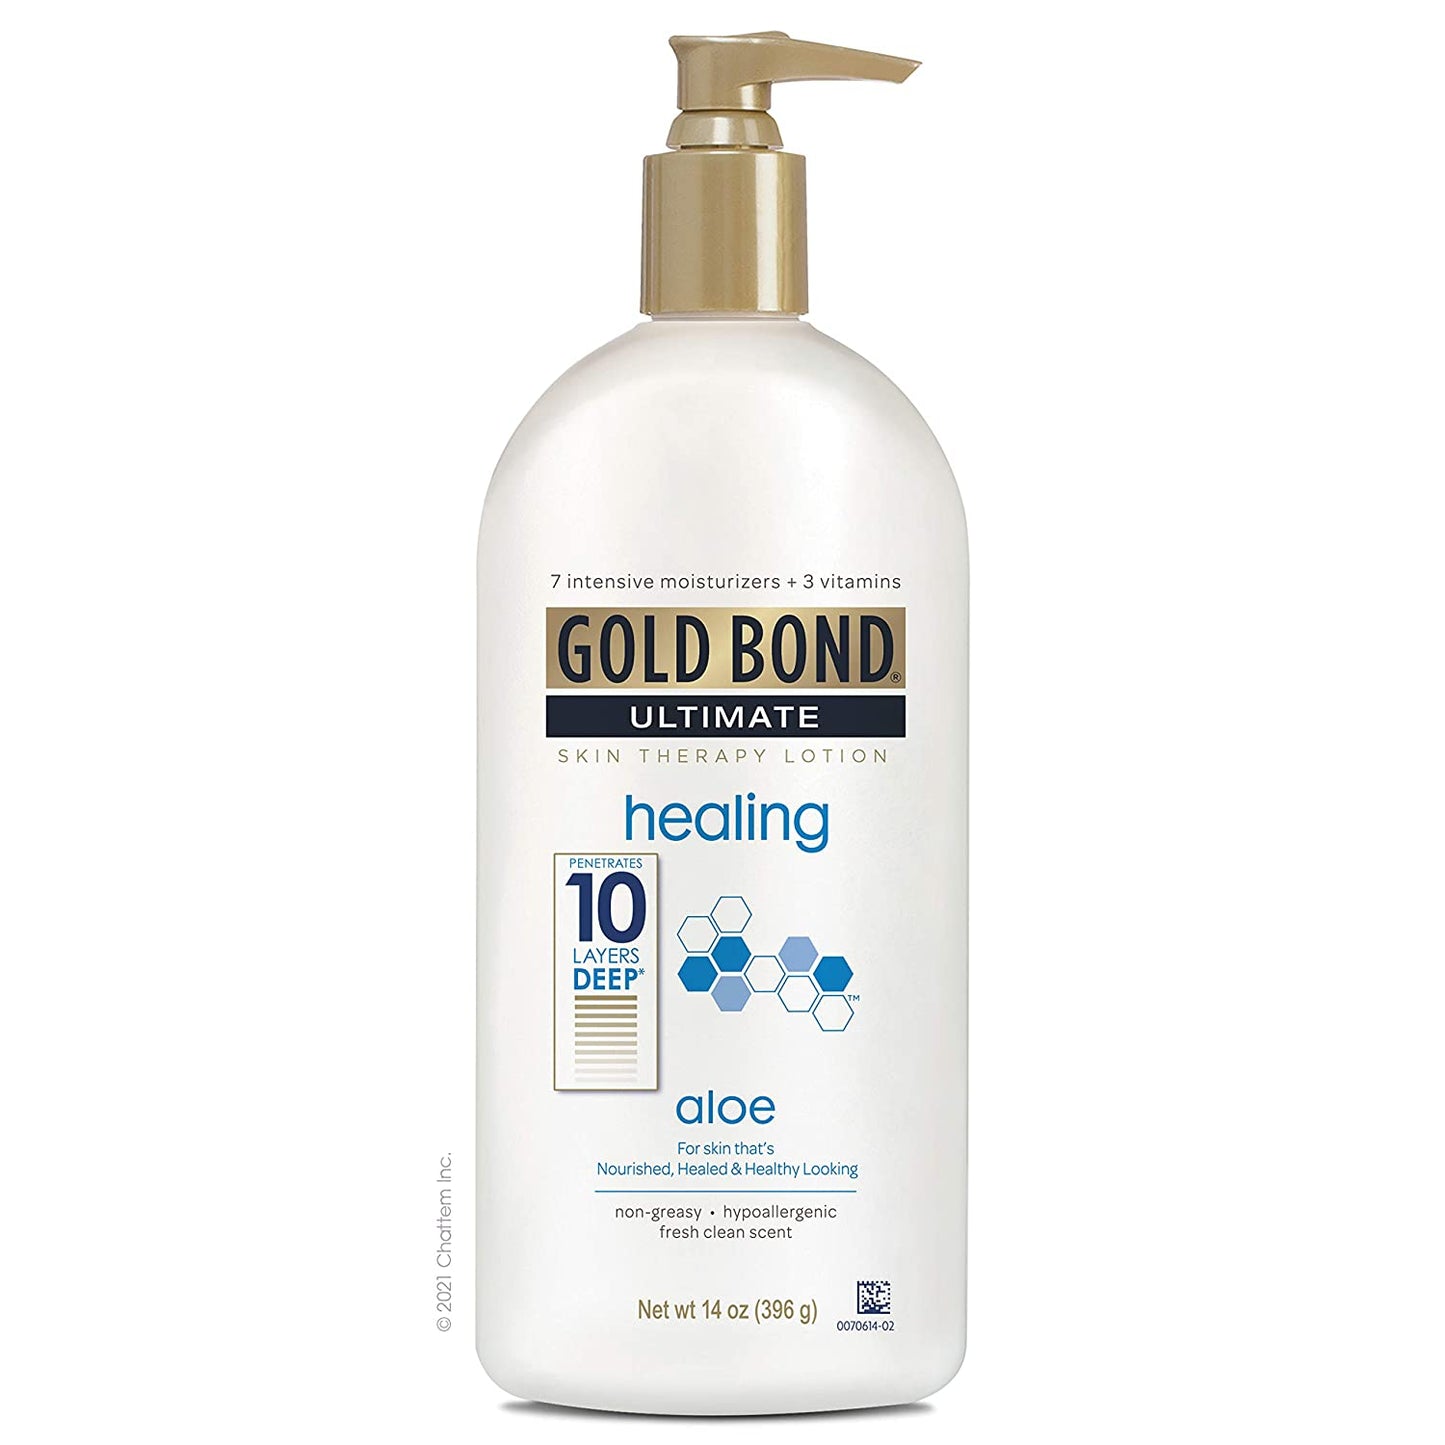 Gold Bond Ultimate Healing Skin Therapy Lotion, Aloe, 14 oz. / 396g